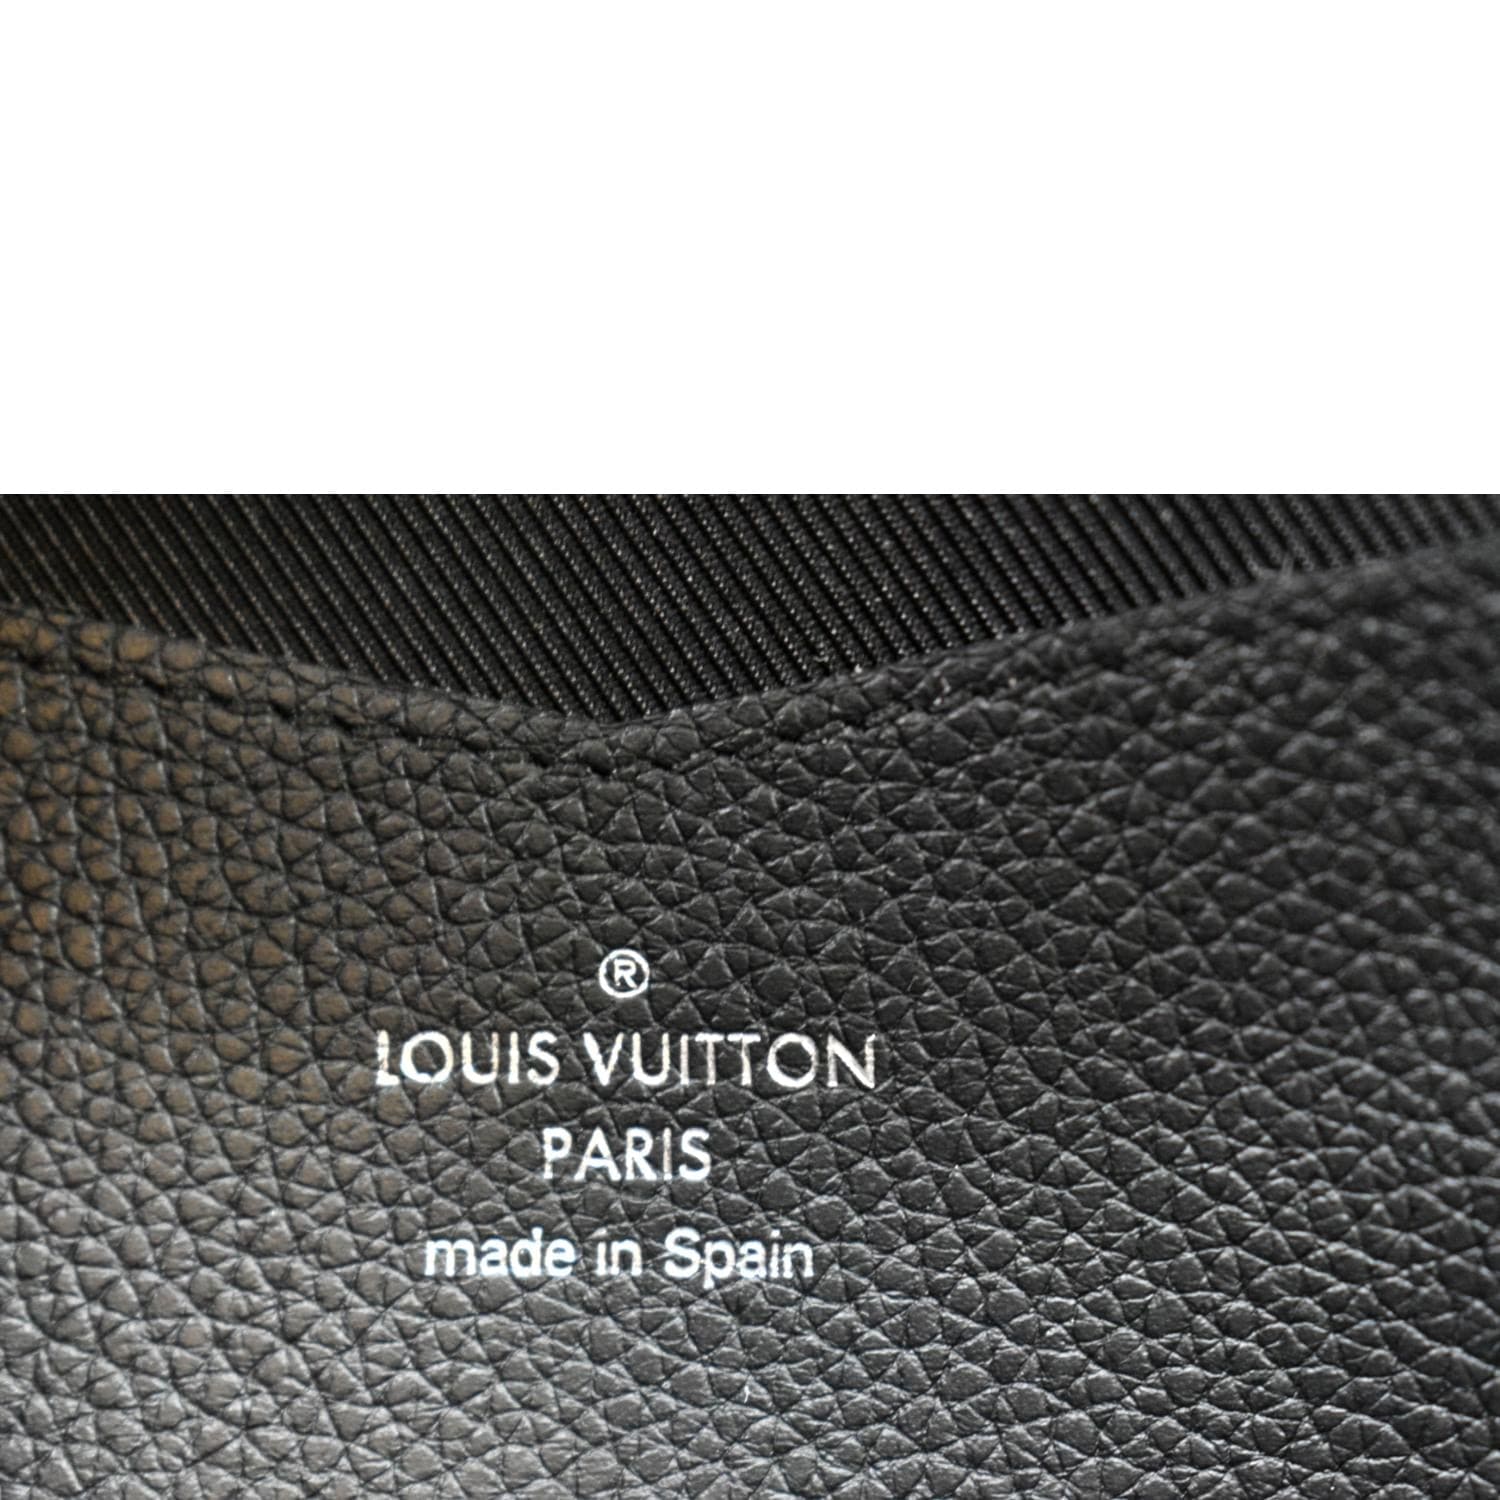 Wallet Louis Vuitton Soft Calf Leather Portefeuille Lock Me 2 M61277  121060279 - Heritage Estate Jewelry